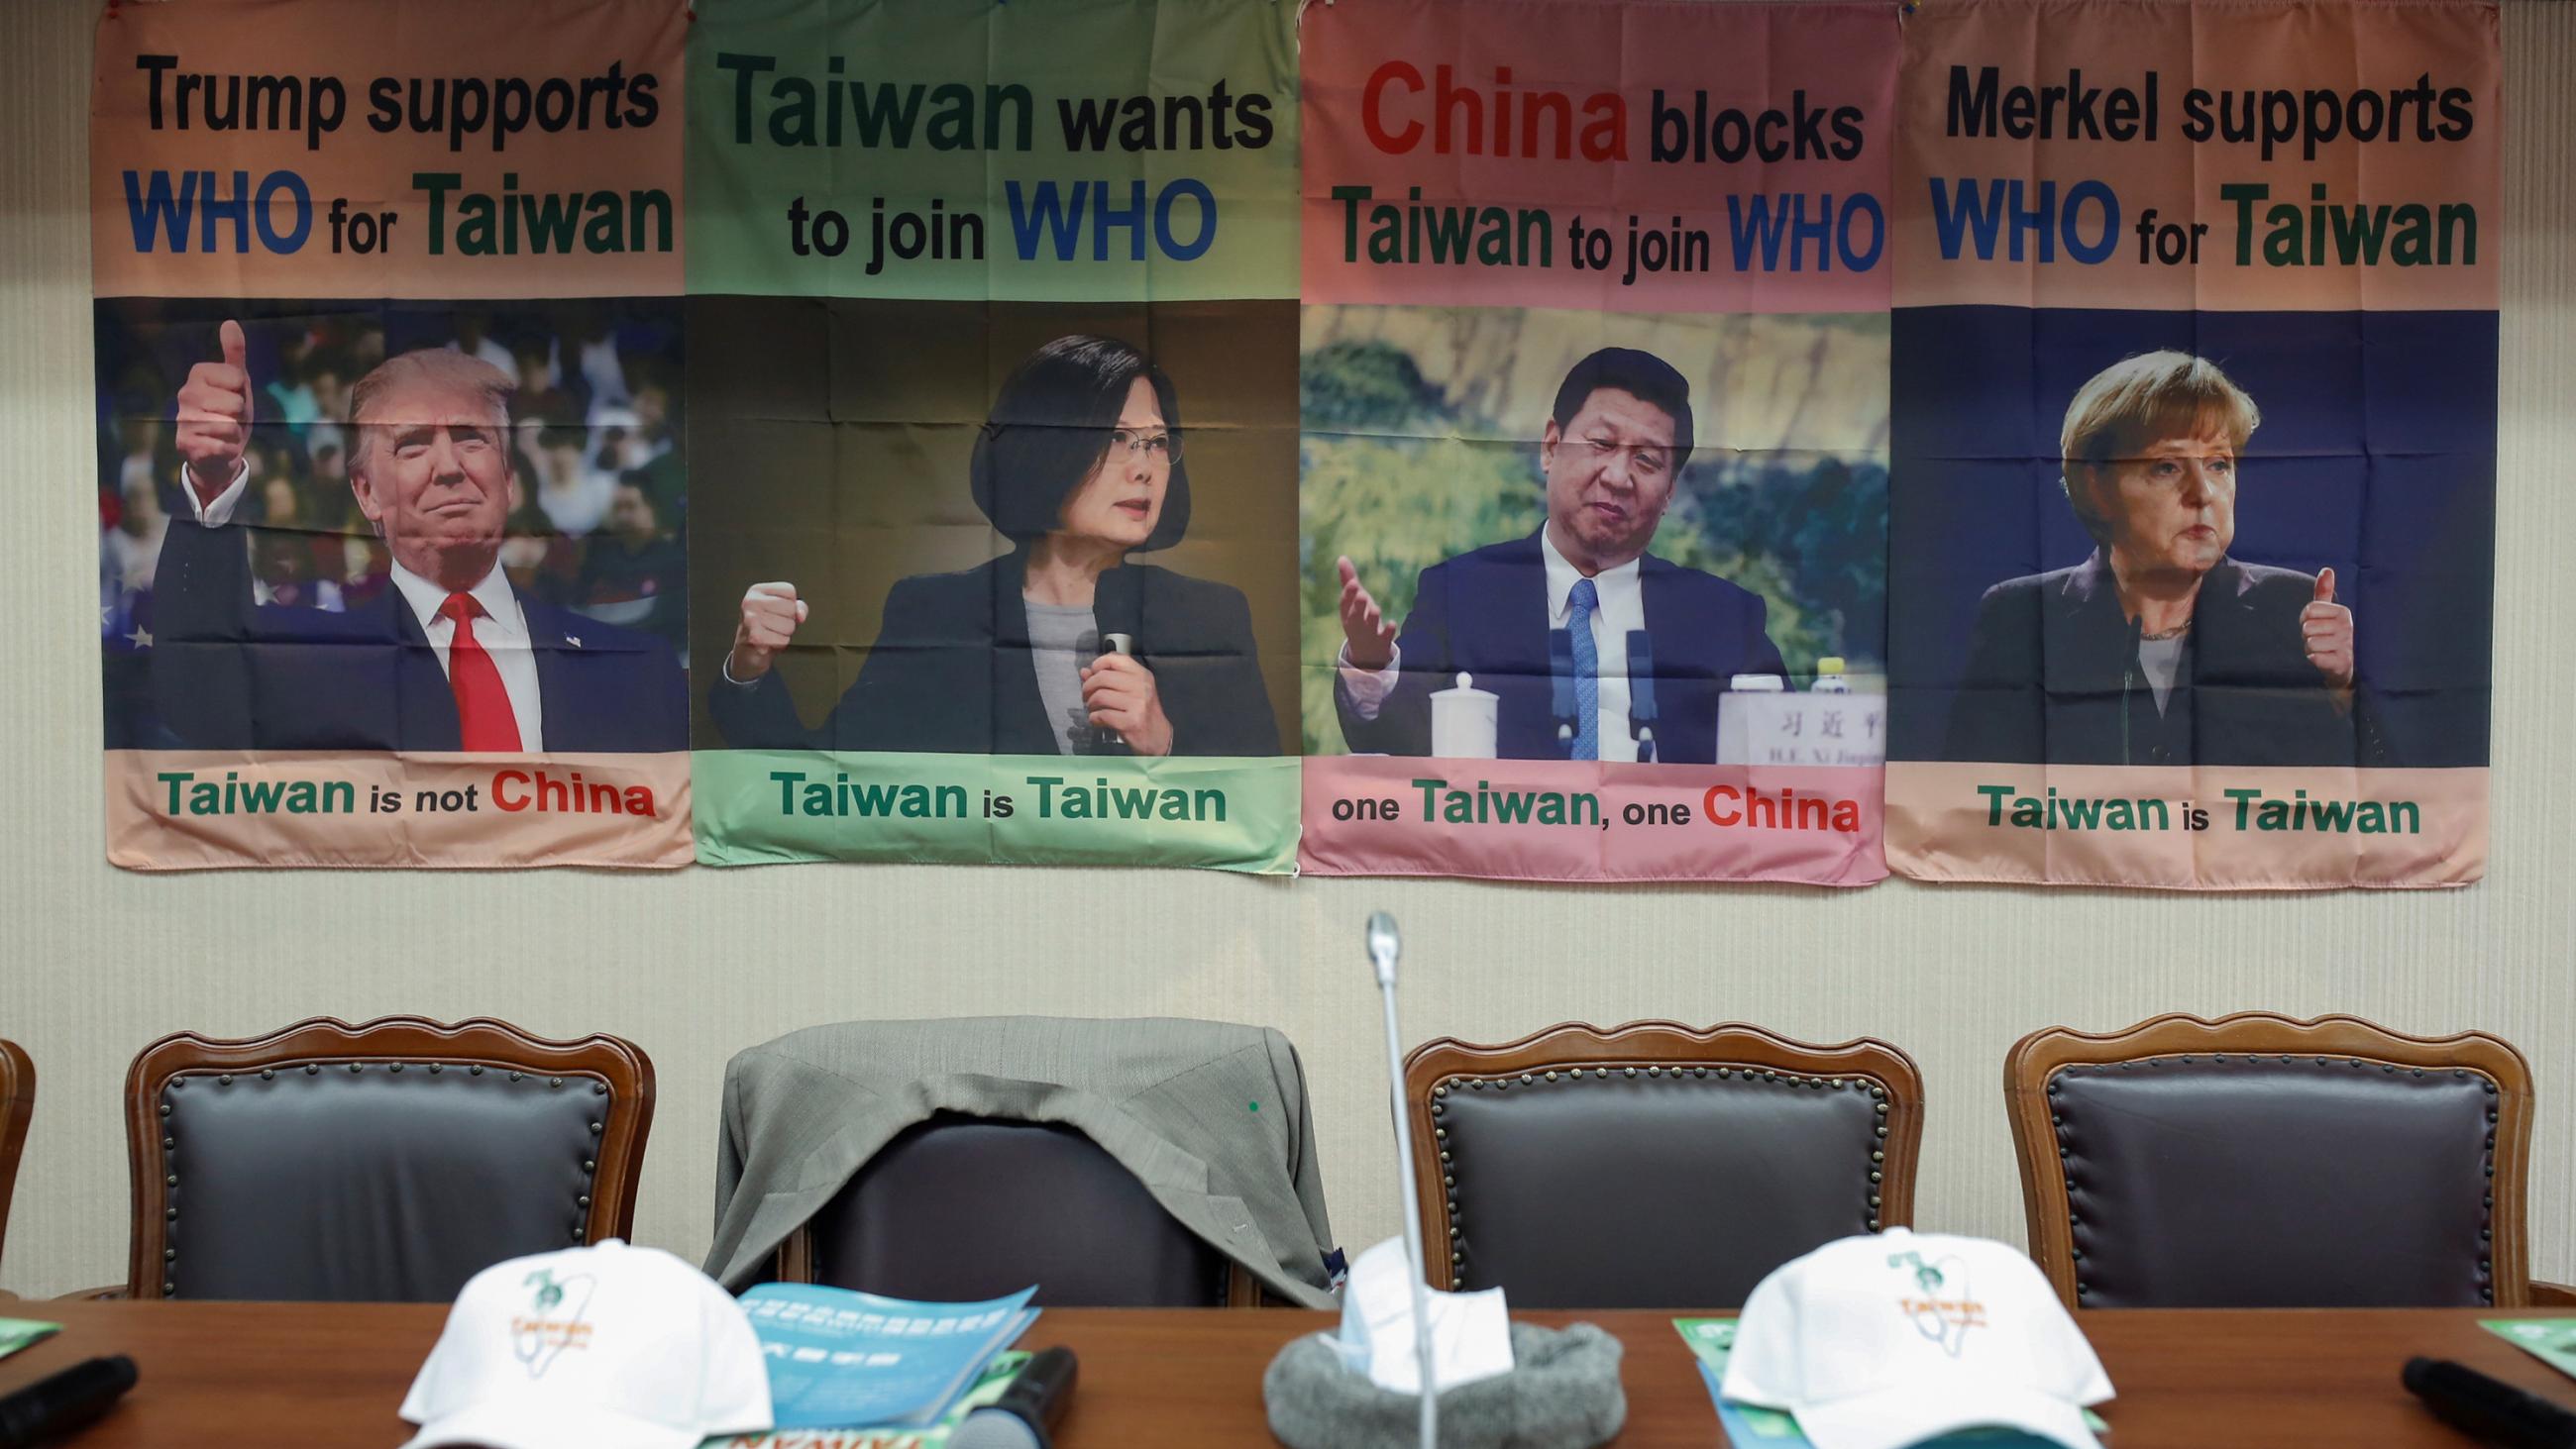 The photo shows empty seats, one with a jacket thrown over the back of it, with posters in the background showing testimonials by world leaders in support of Taiwan's WHO bid. 